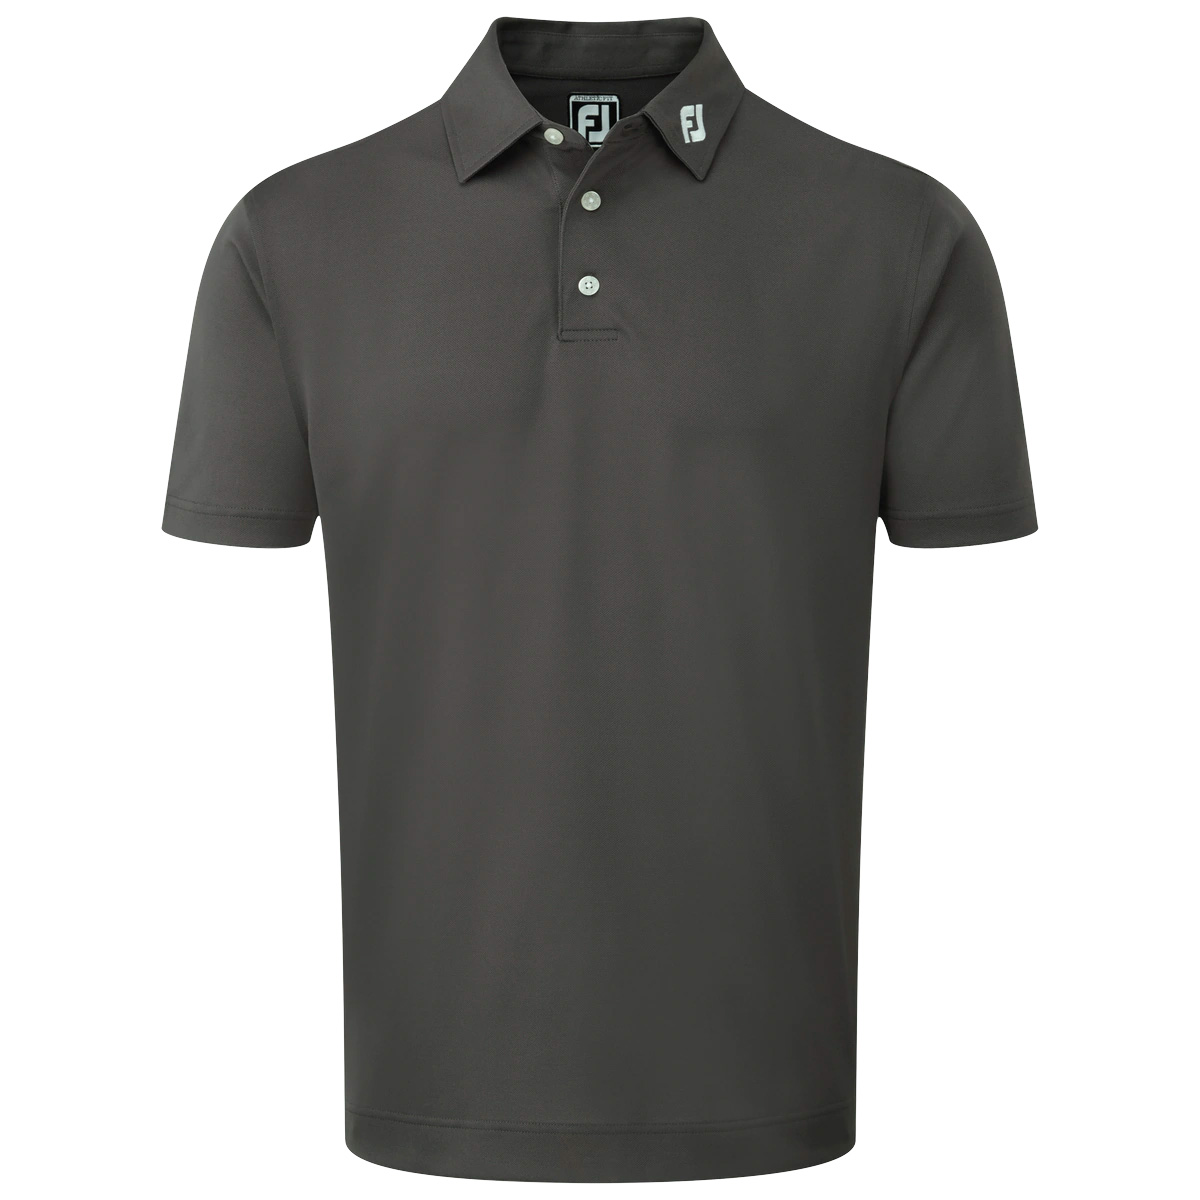 FootJoy Stretch Pique Solid Mens Golf Polo Shirt  - Charcoal